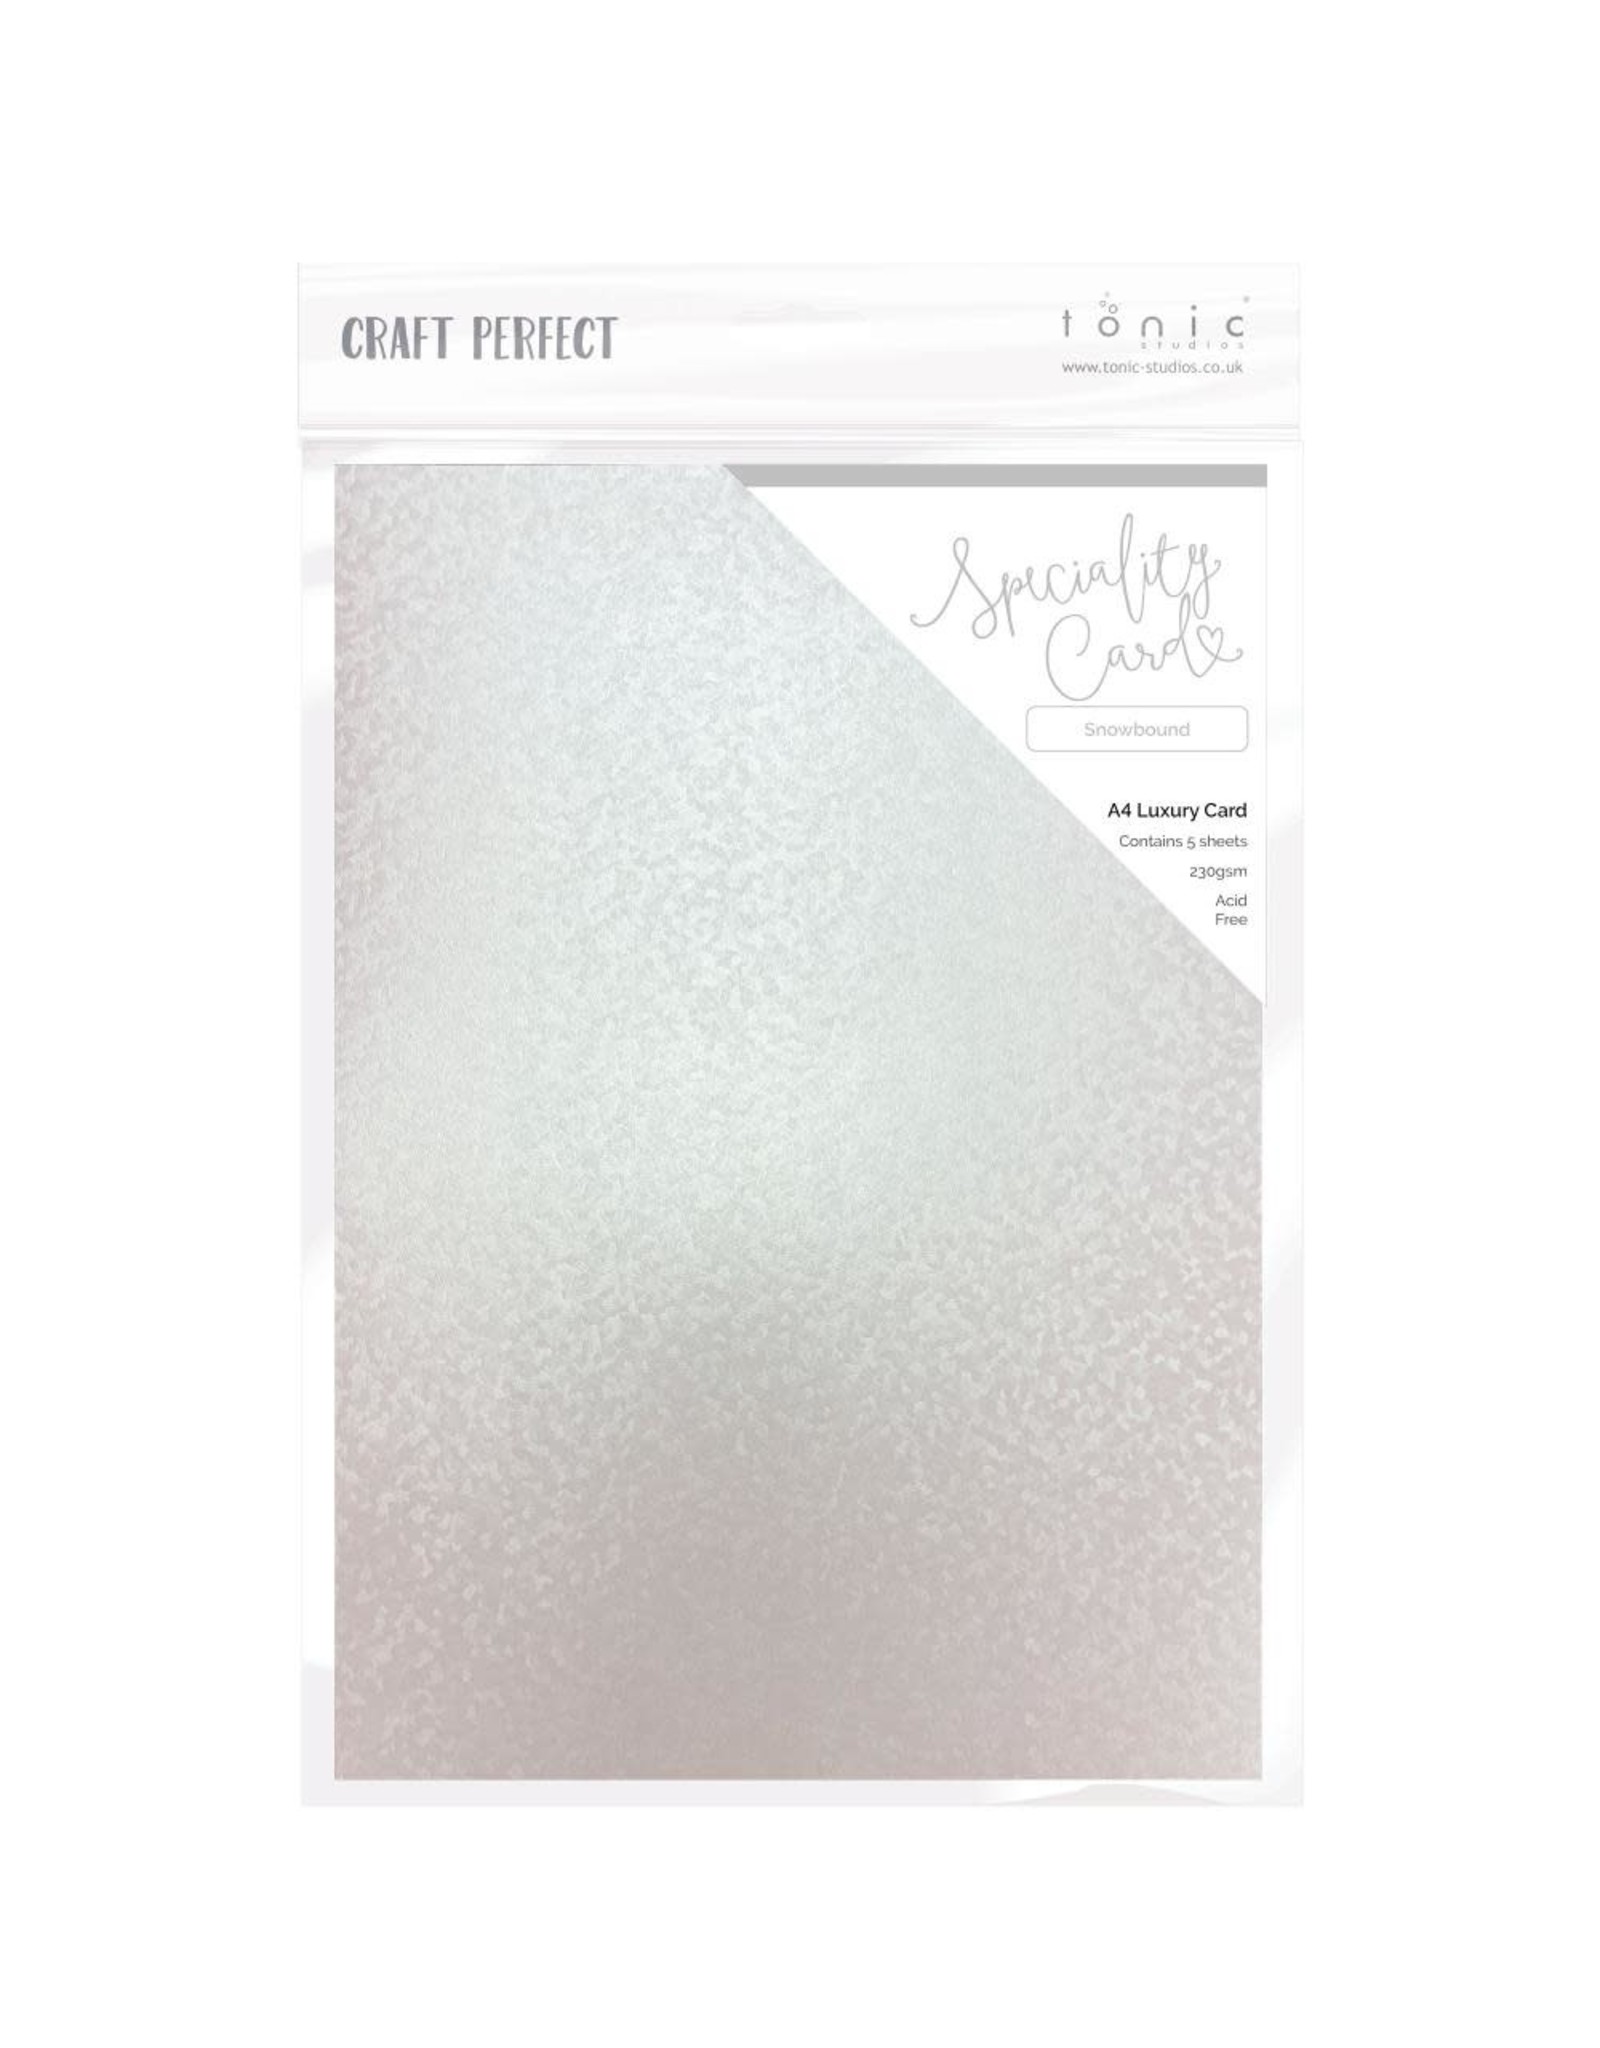 TONIC TONIC STUDIOS SPECIALITY CARD A4 LUXURY EMBOSSED CARD SNOWBOUND 5/PK